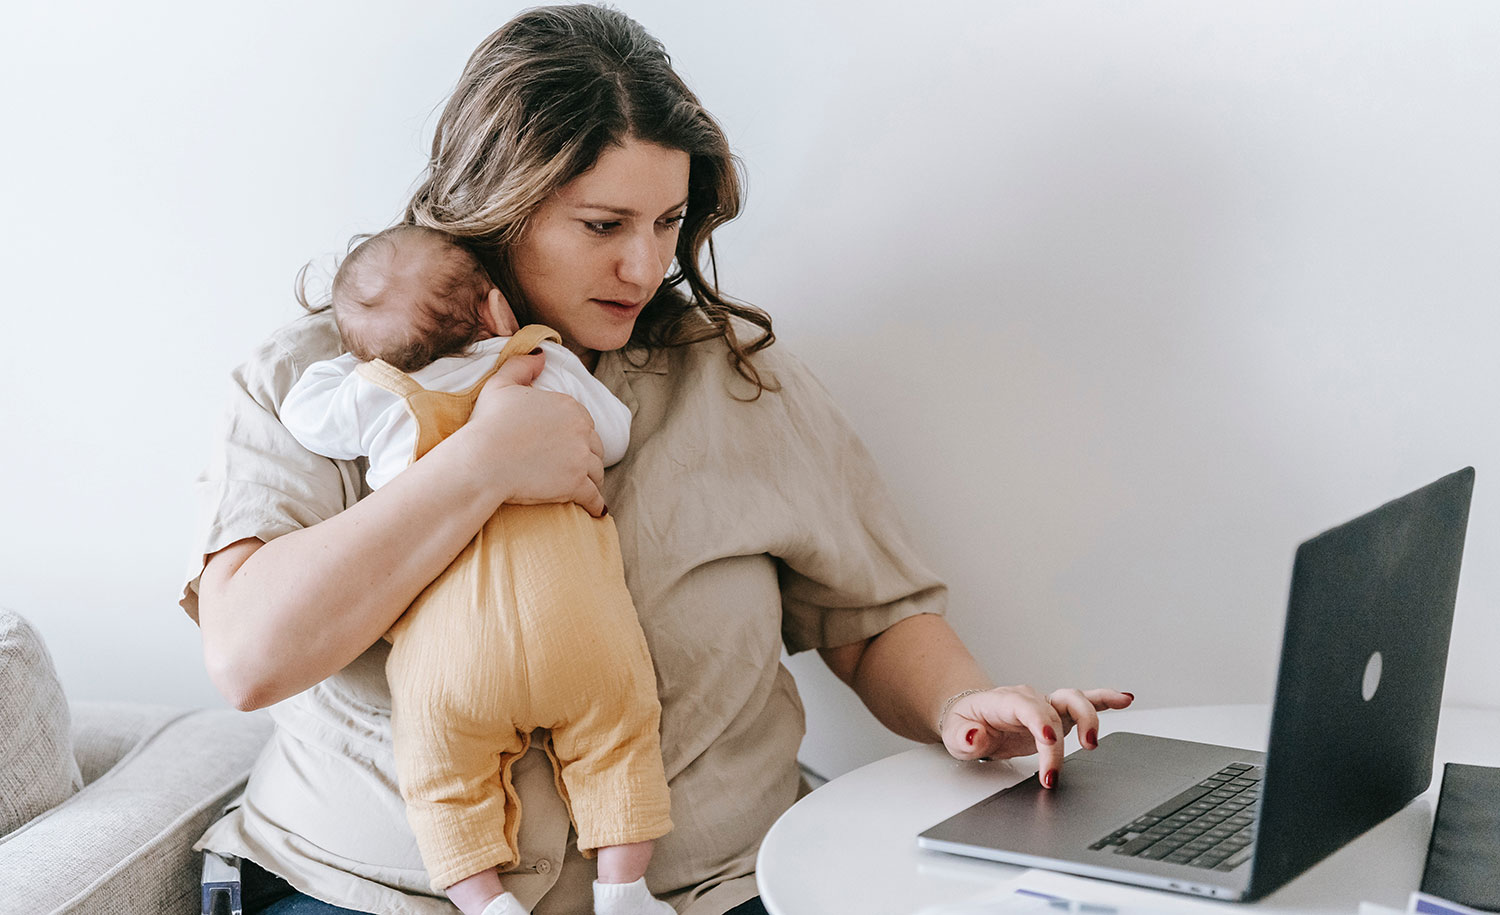 An introverted parent trying to work and care for her baby